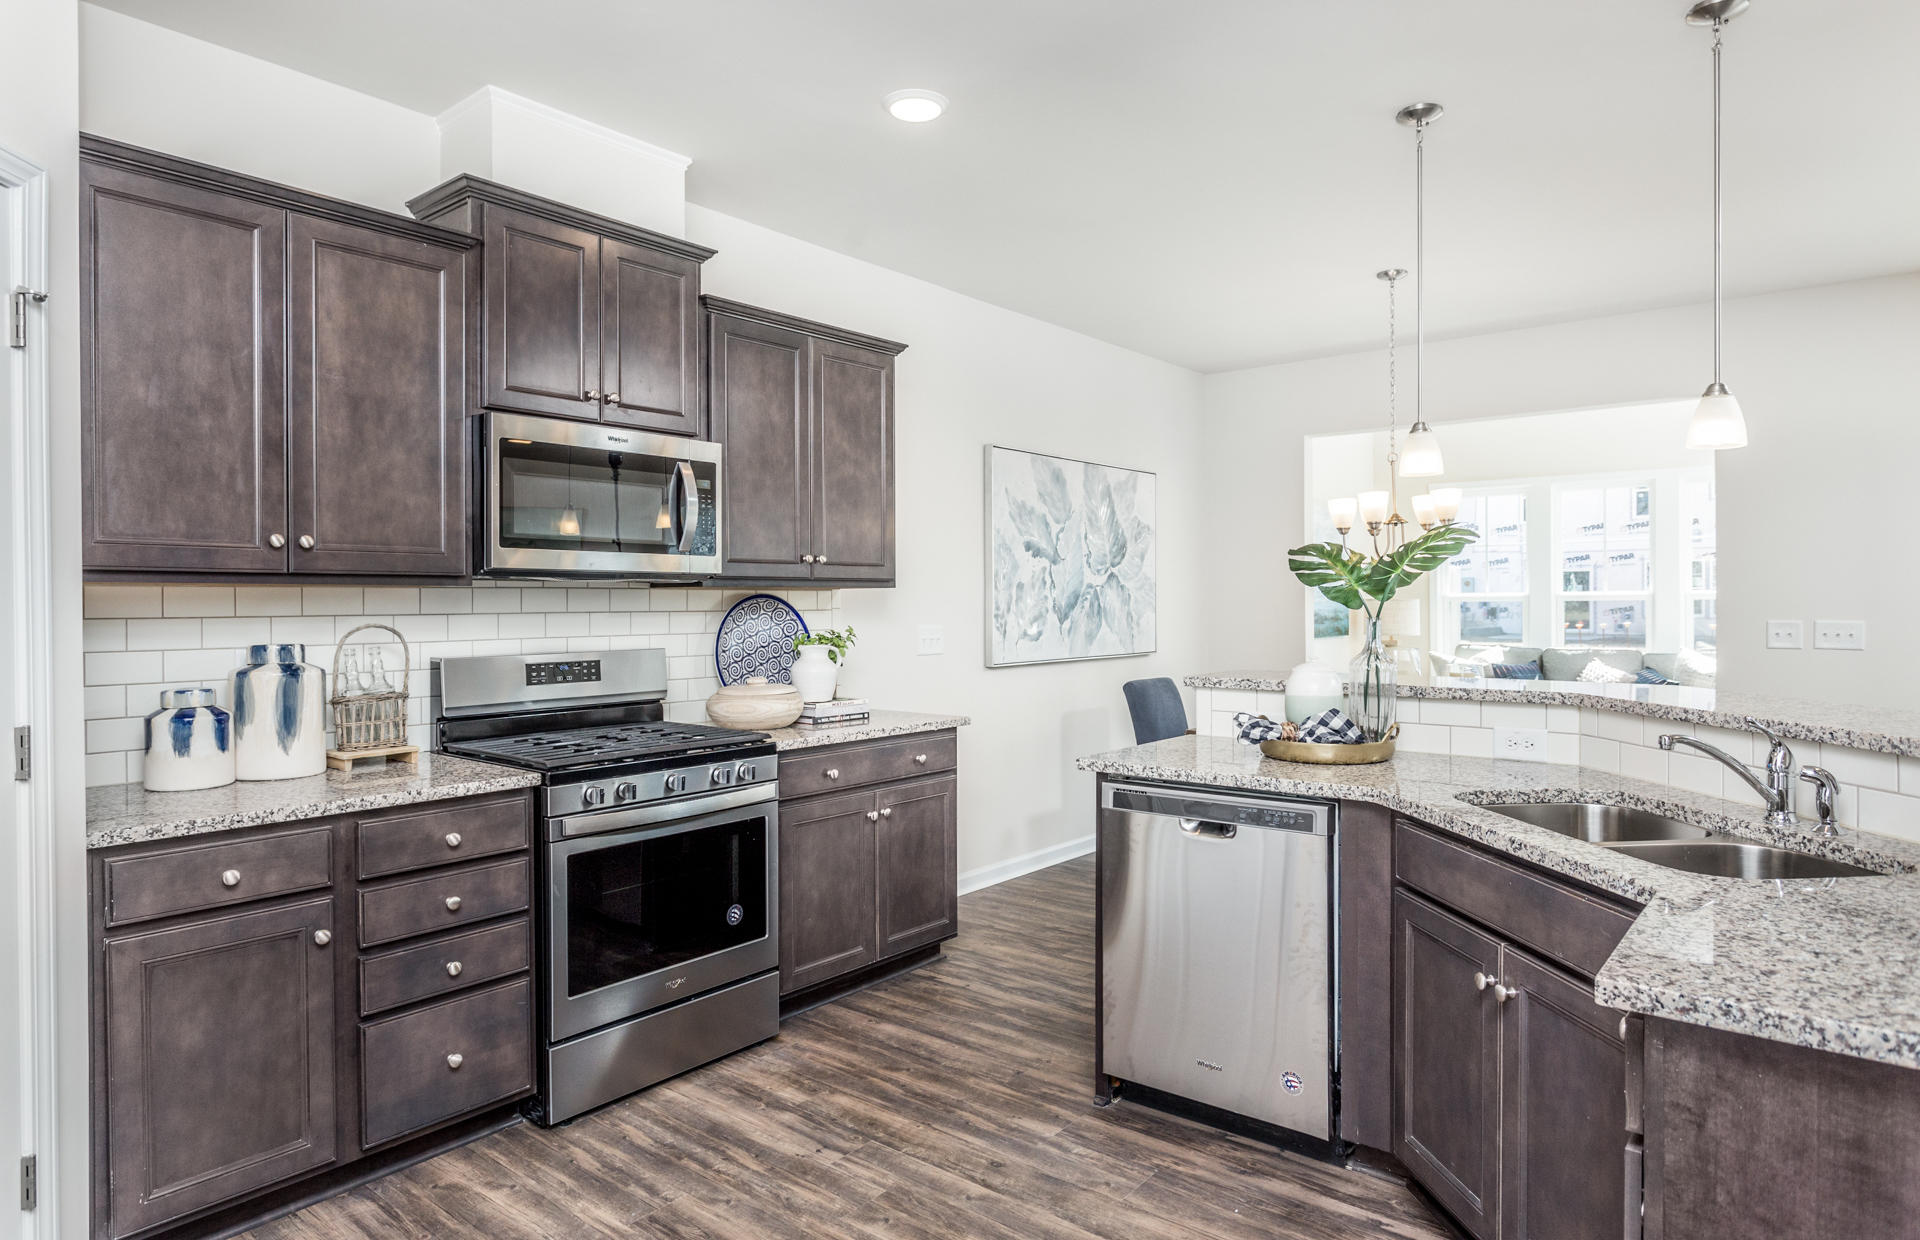 Woodbury by Pulte Homes Photo